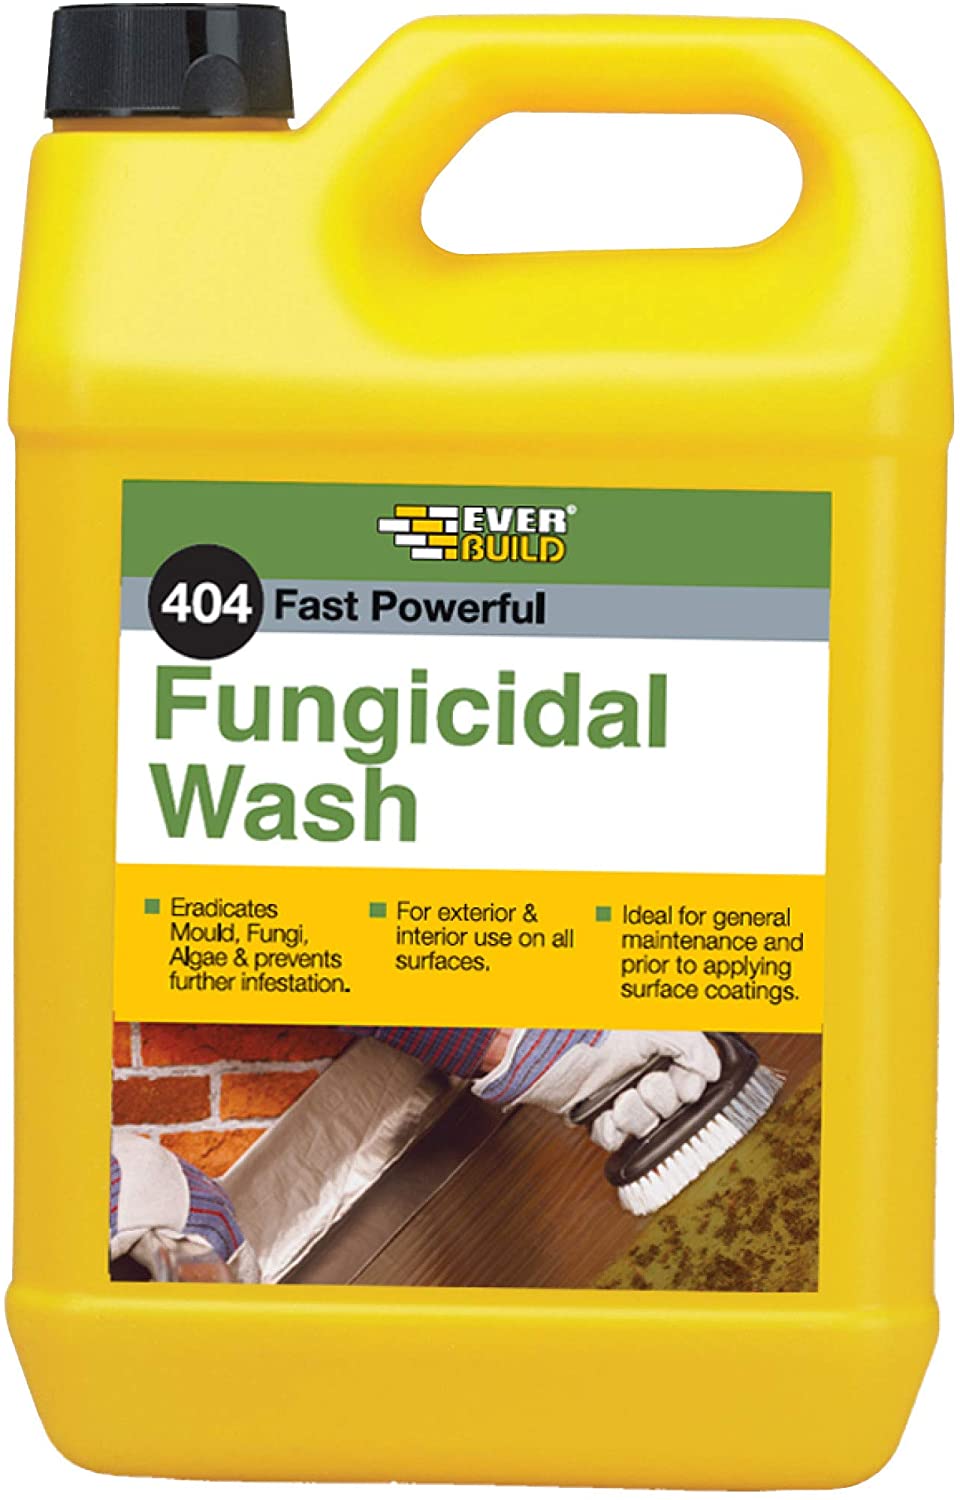 Everbuild 404 Fast Powerful Fungicidal Wash, 5 Litre Ideal for Decking and patio